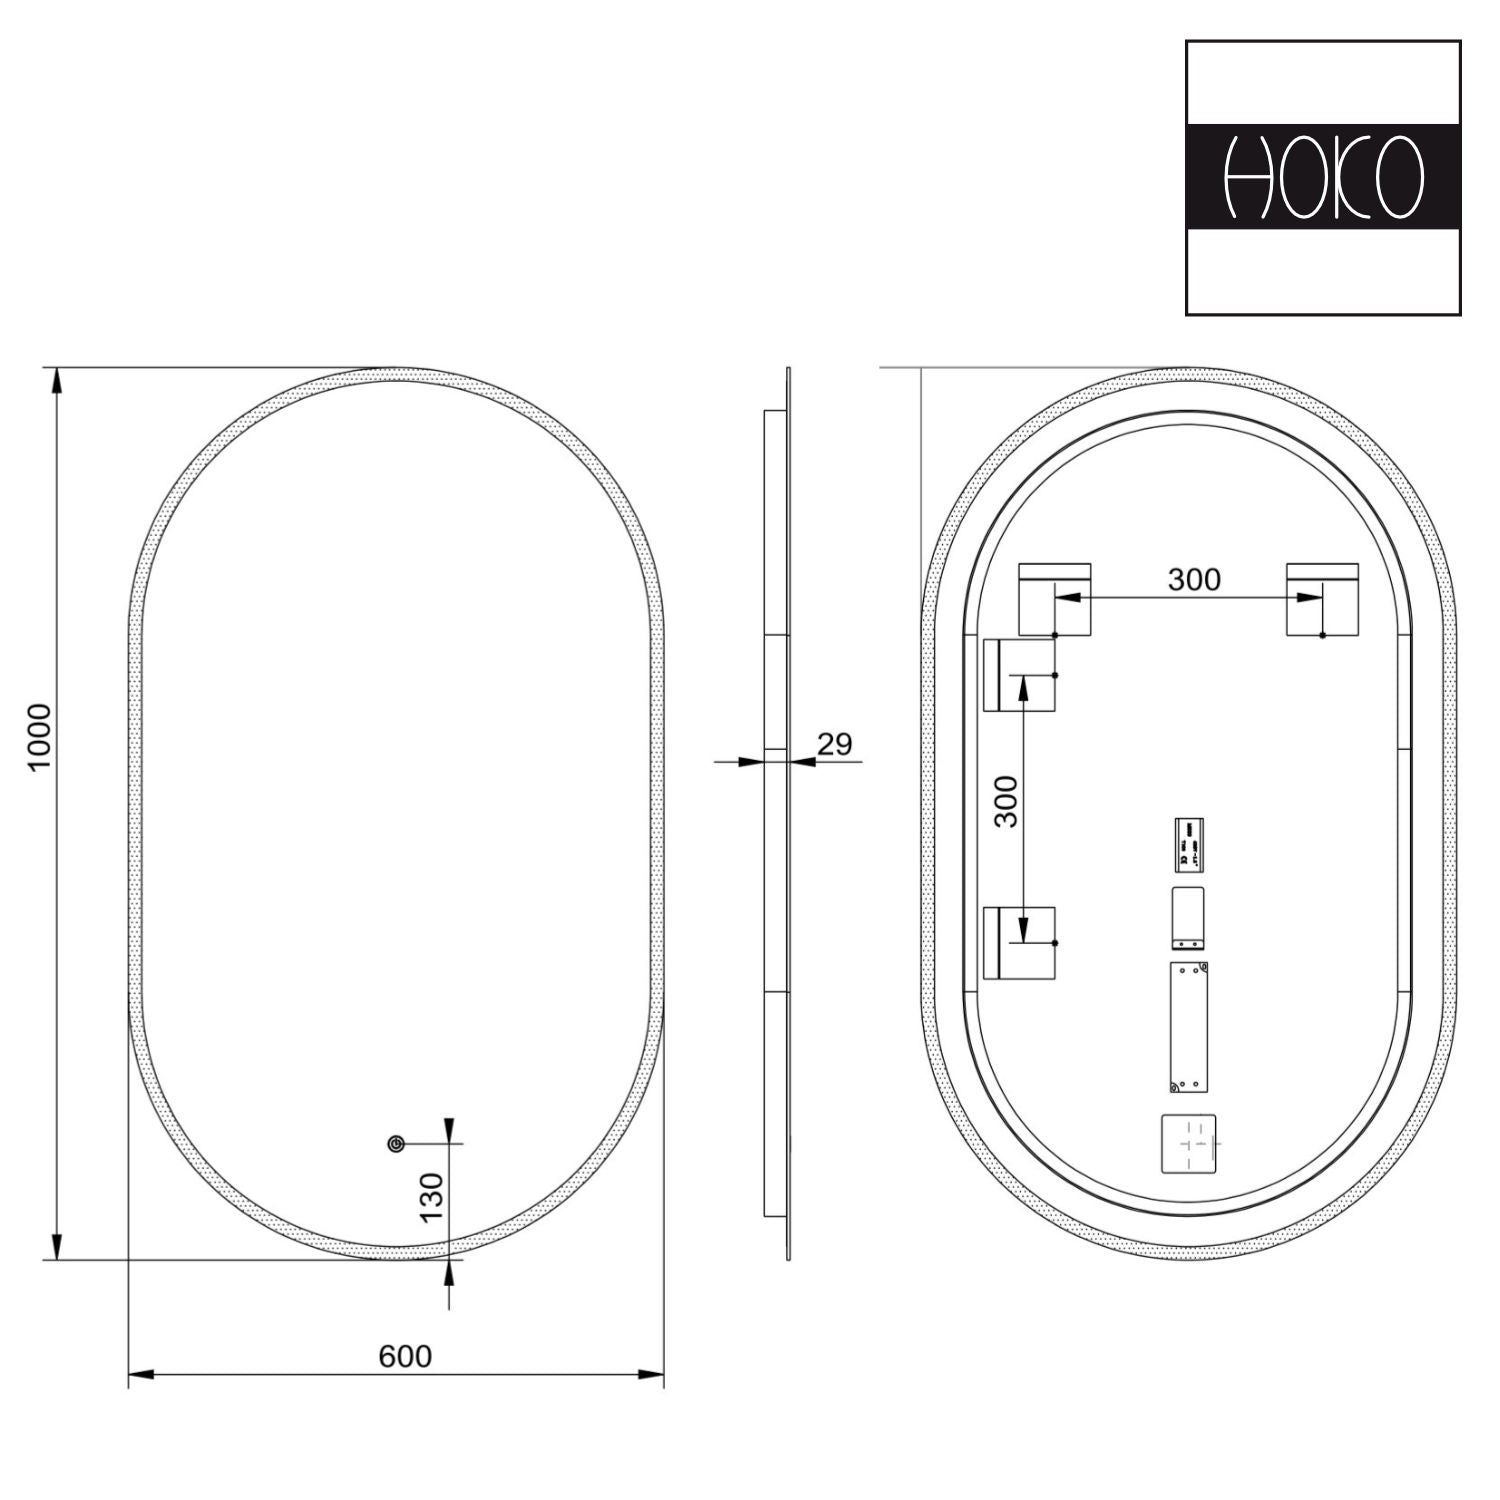 LED design mirror oval without frame. Vertical & horizontal hanging. Bathroom mirror / dressing table mirror outside LED illuminated. Light change warm white / cool white.